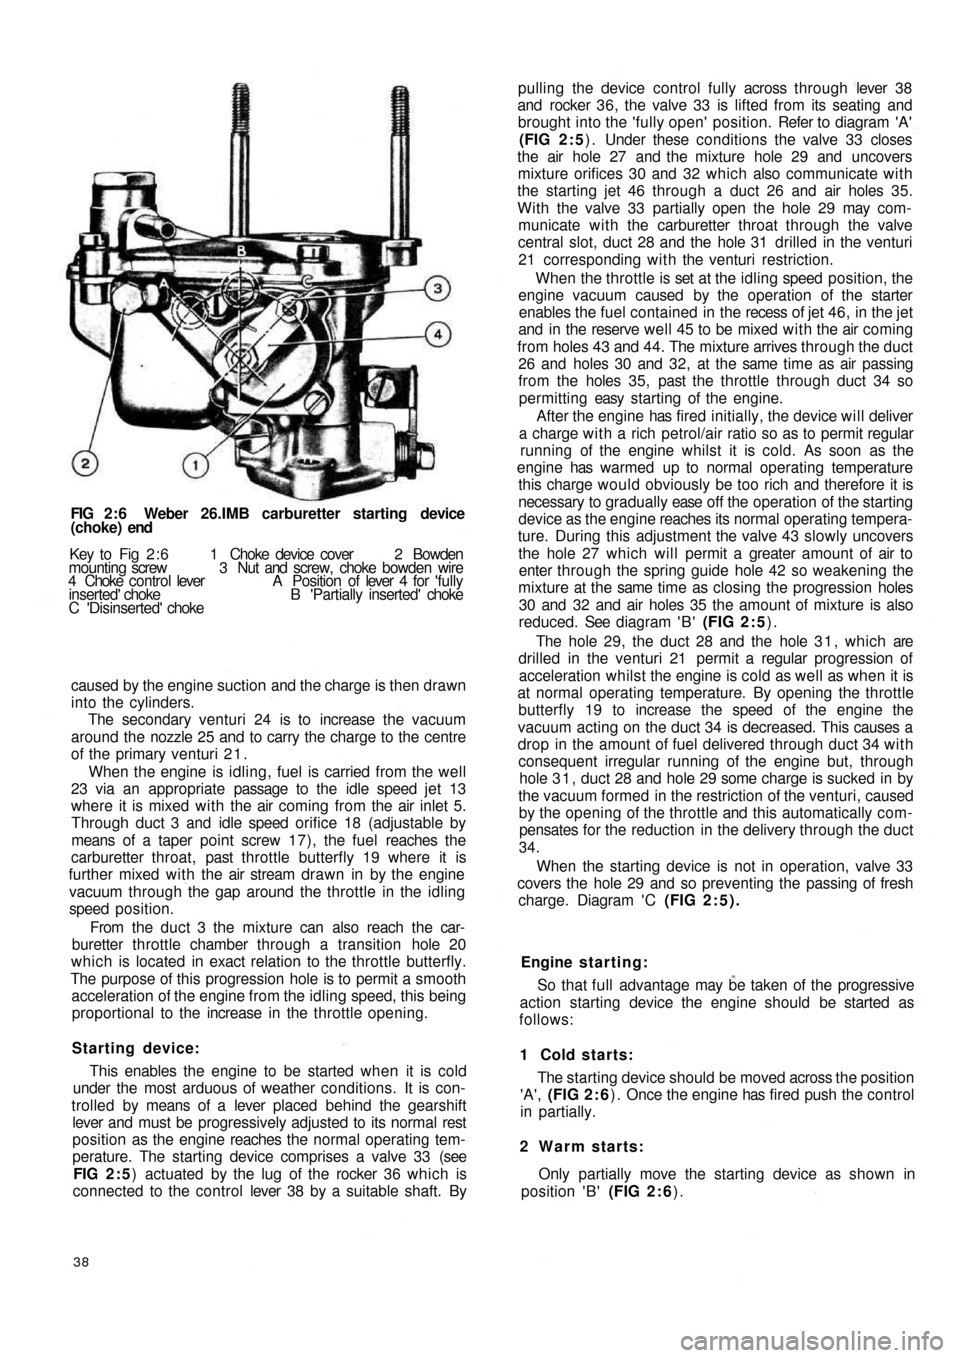 FIAT 500 1969 1.G Owners Guide FIG 2 : 6  Weber 26.IMB carburetter starting device
(choke) end
Key  to   Fig   2 : 6   1   Choke  device  cover   2  Bowden
mounting screw  3  Nut and screw, choke bowden wire
4  Choke  control lever